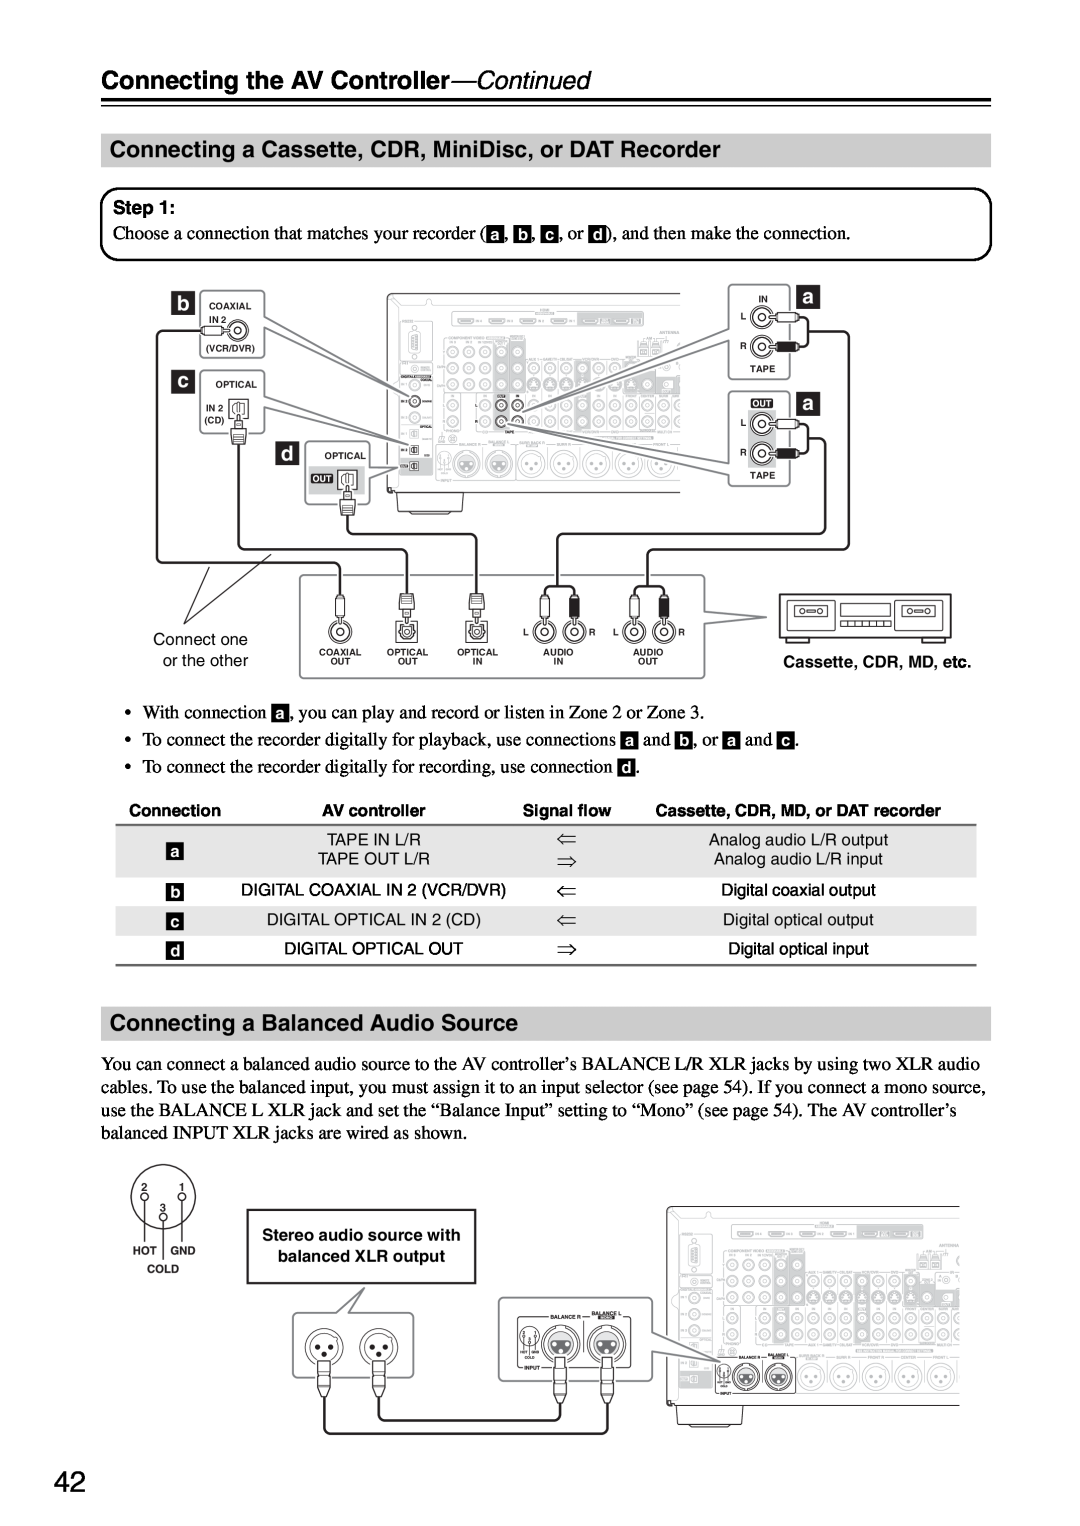 Onkyo PR-SC886 instruction manual Connecting a Balanced Audio Source, Connecting the AV Controller—Continued 